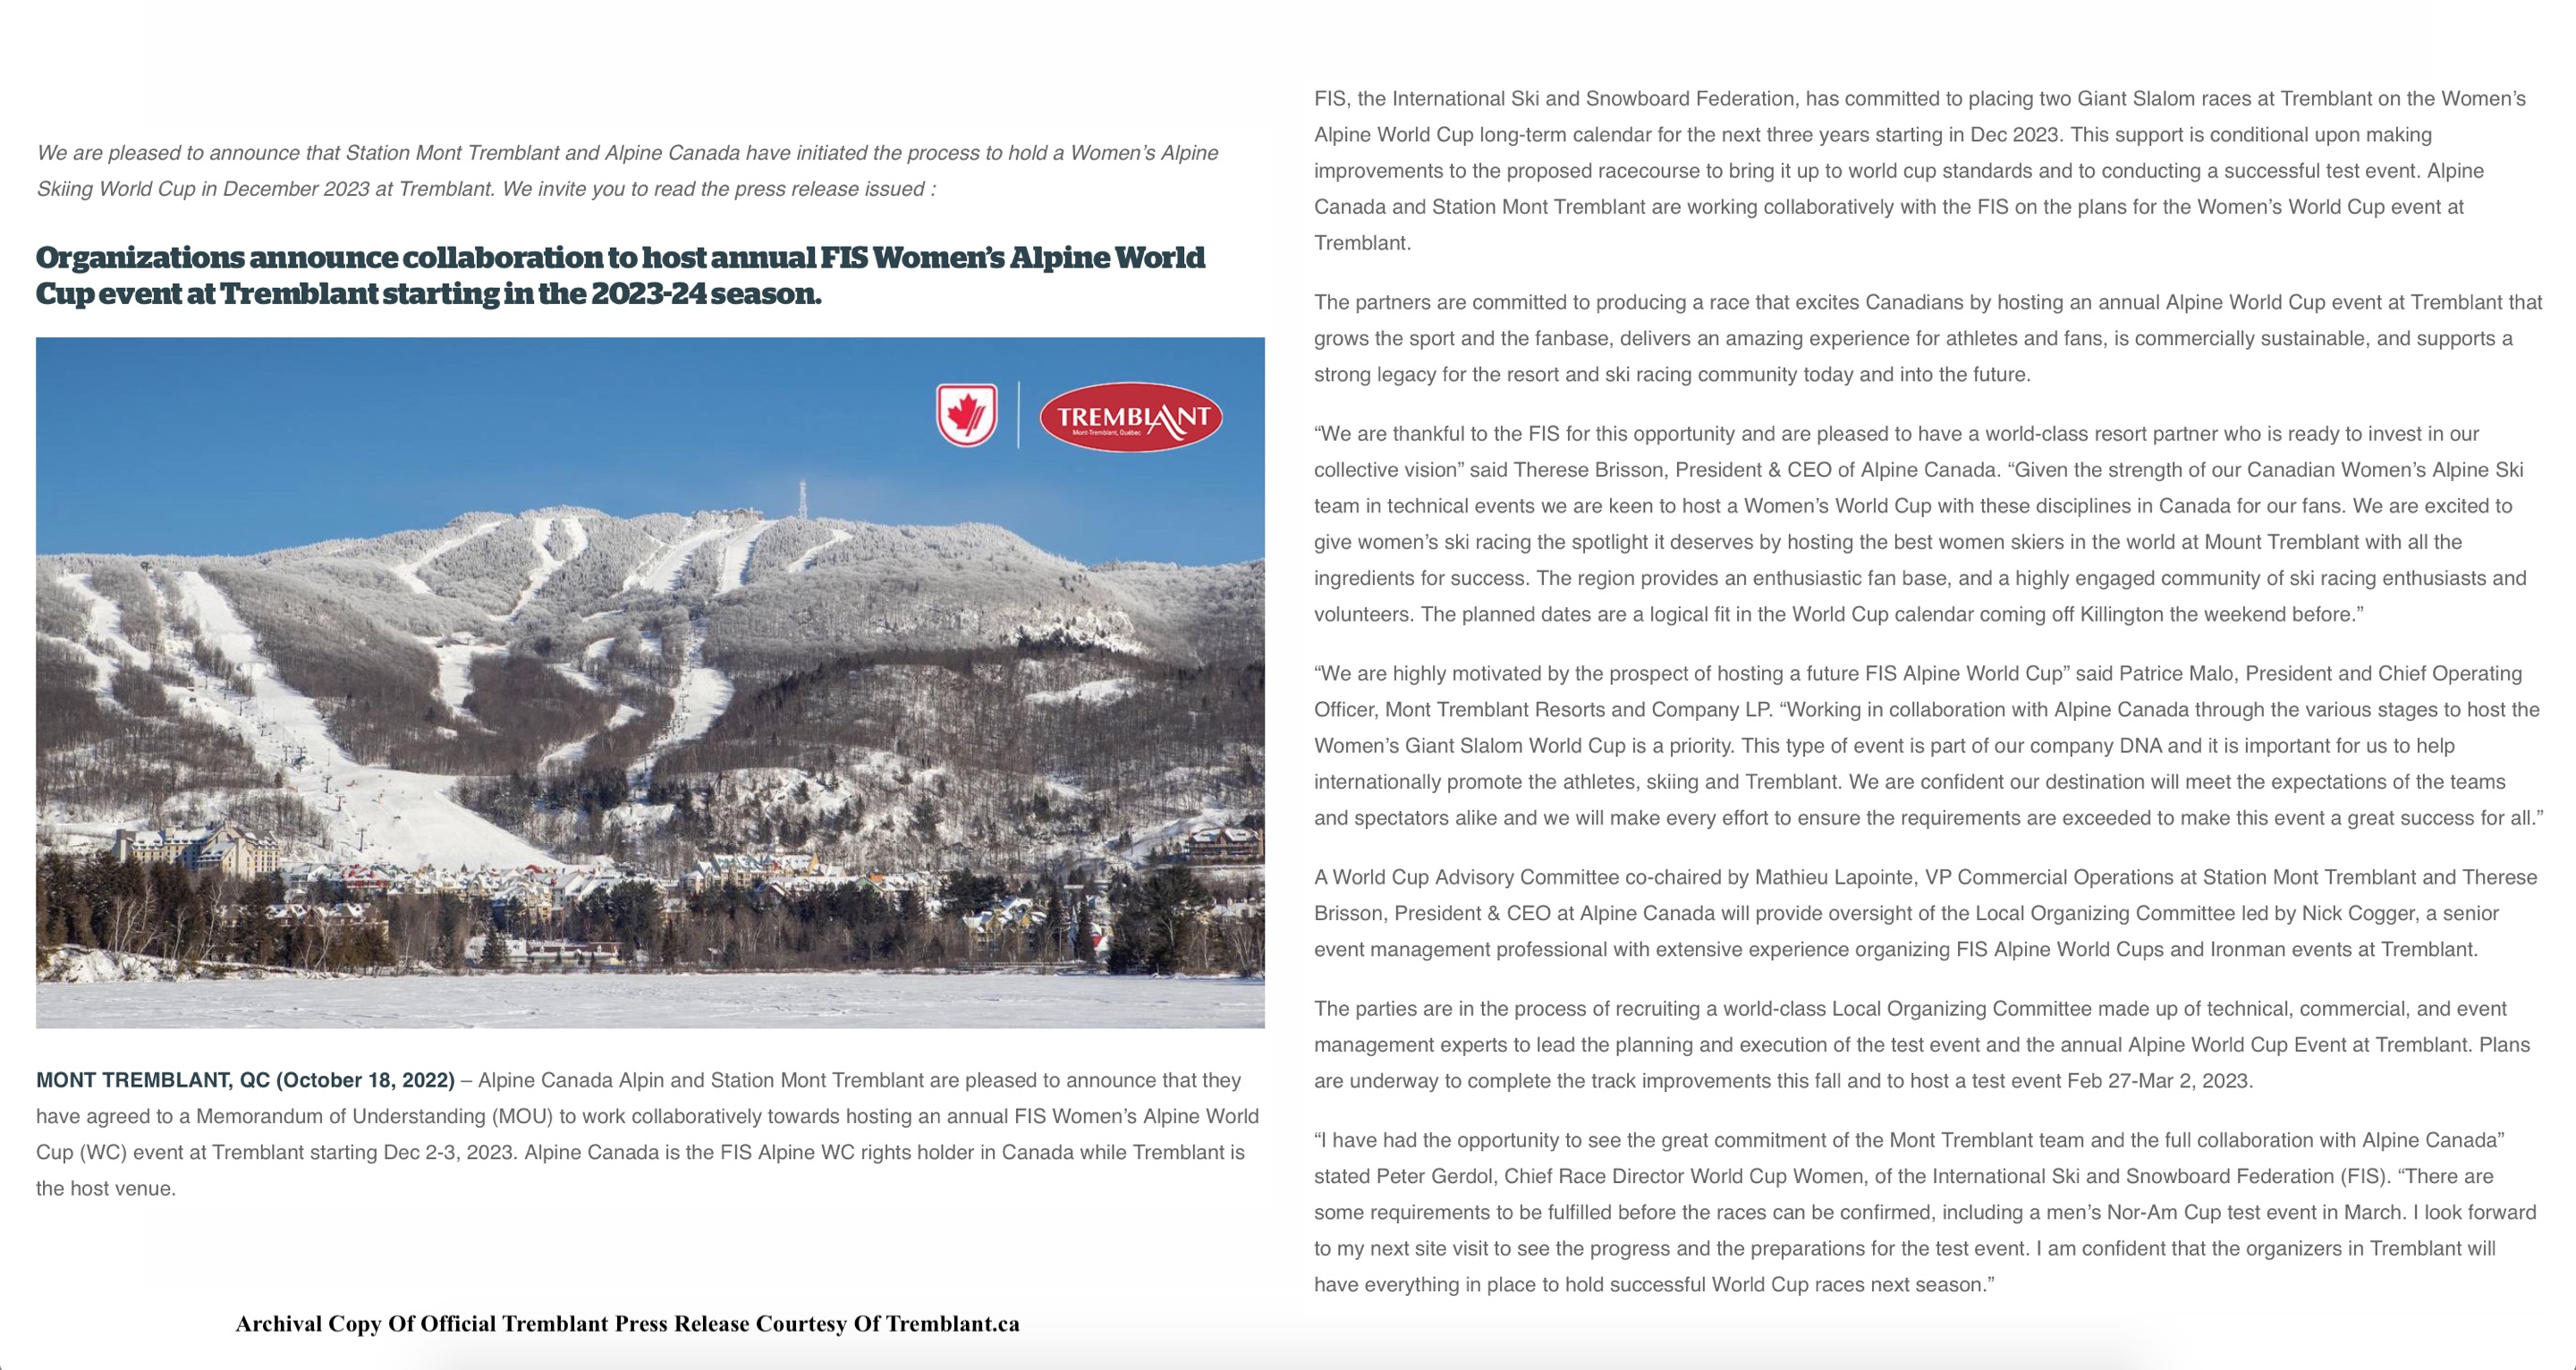 10.18.22.Womens.2023.World.Cup.GS.At.Tremblant.Press.Release.c.jpg